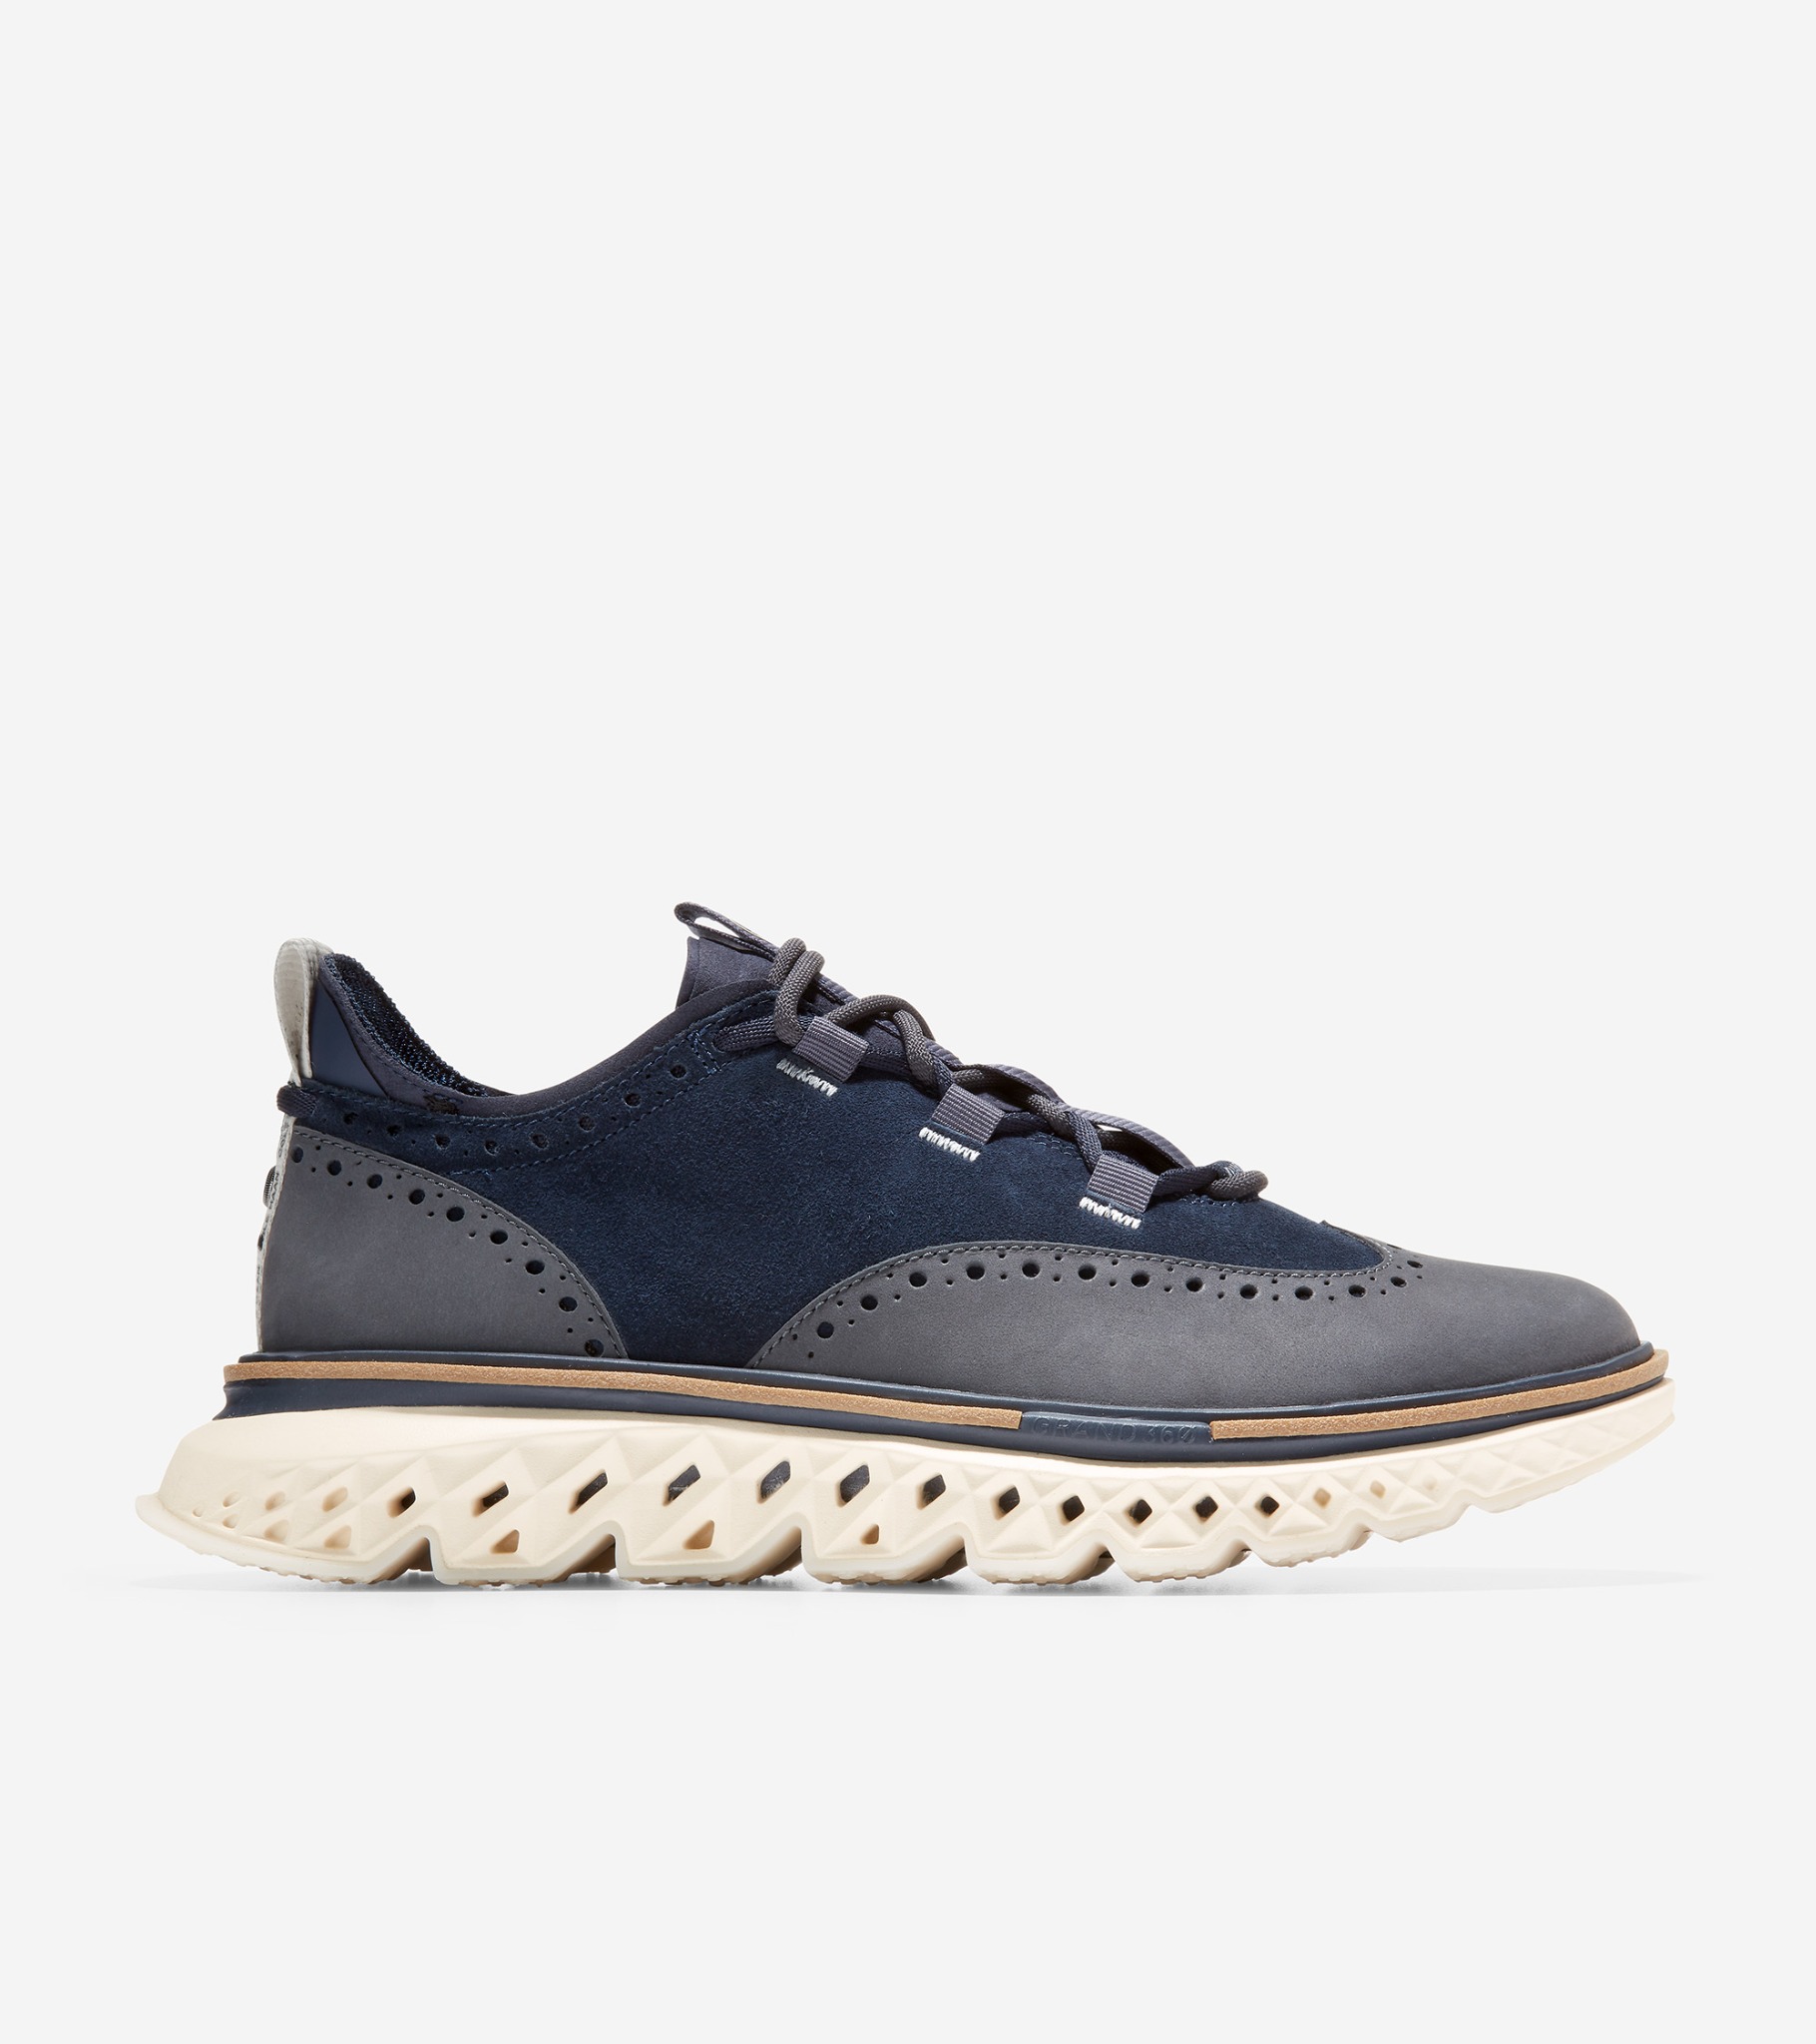 Giày Oxford Cong So Cole Haan Nam 5.Zer grand Wing Oxford C36507 223